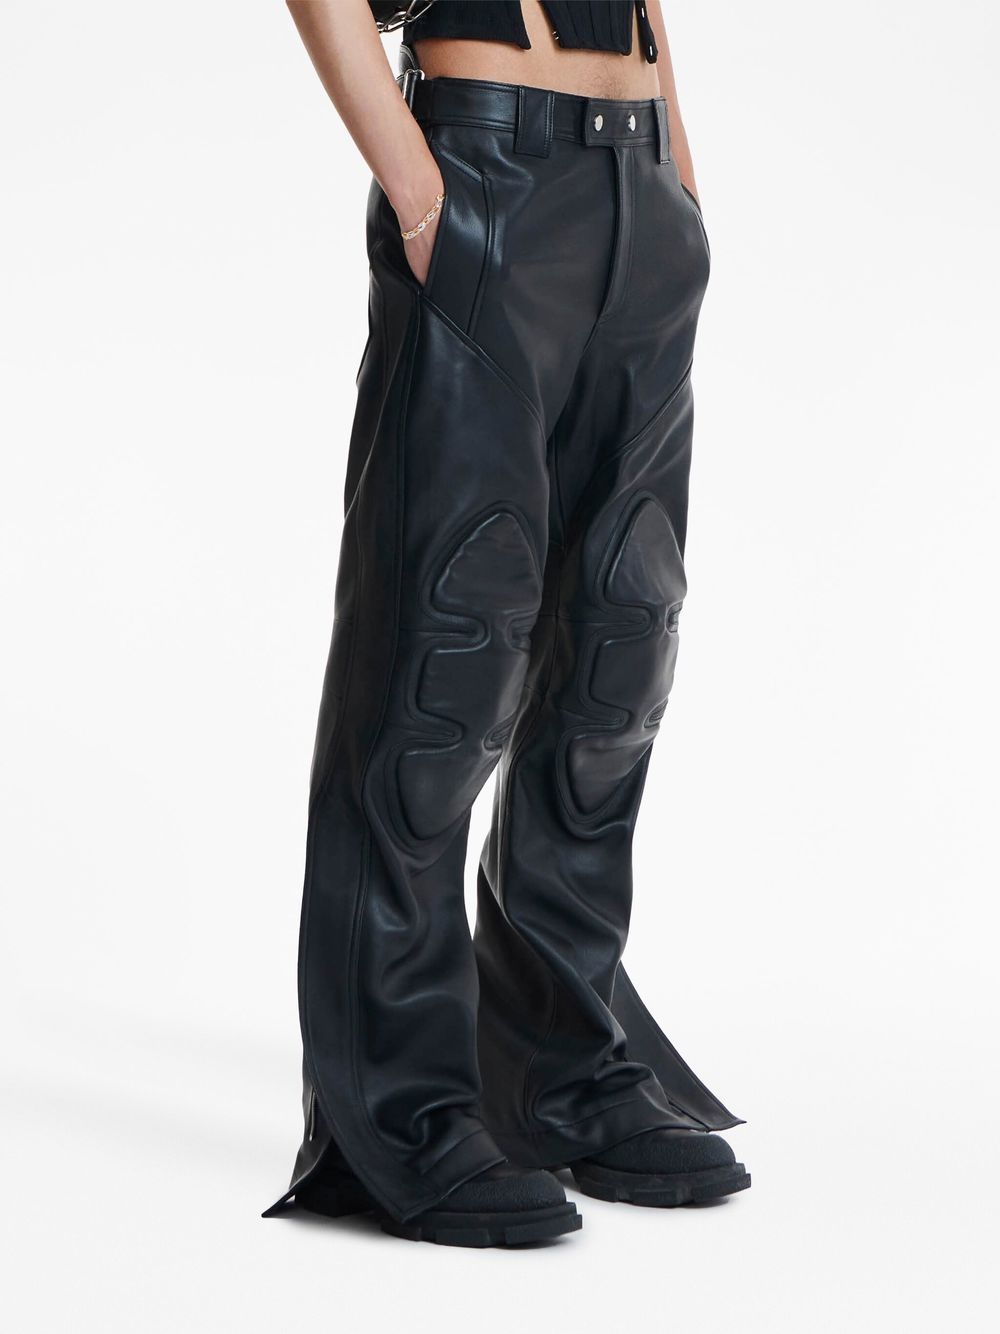 Rider leather trousers